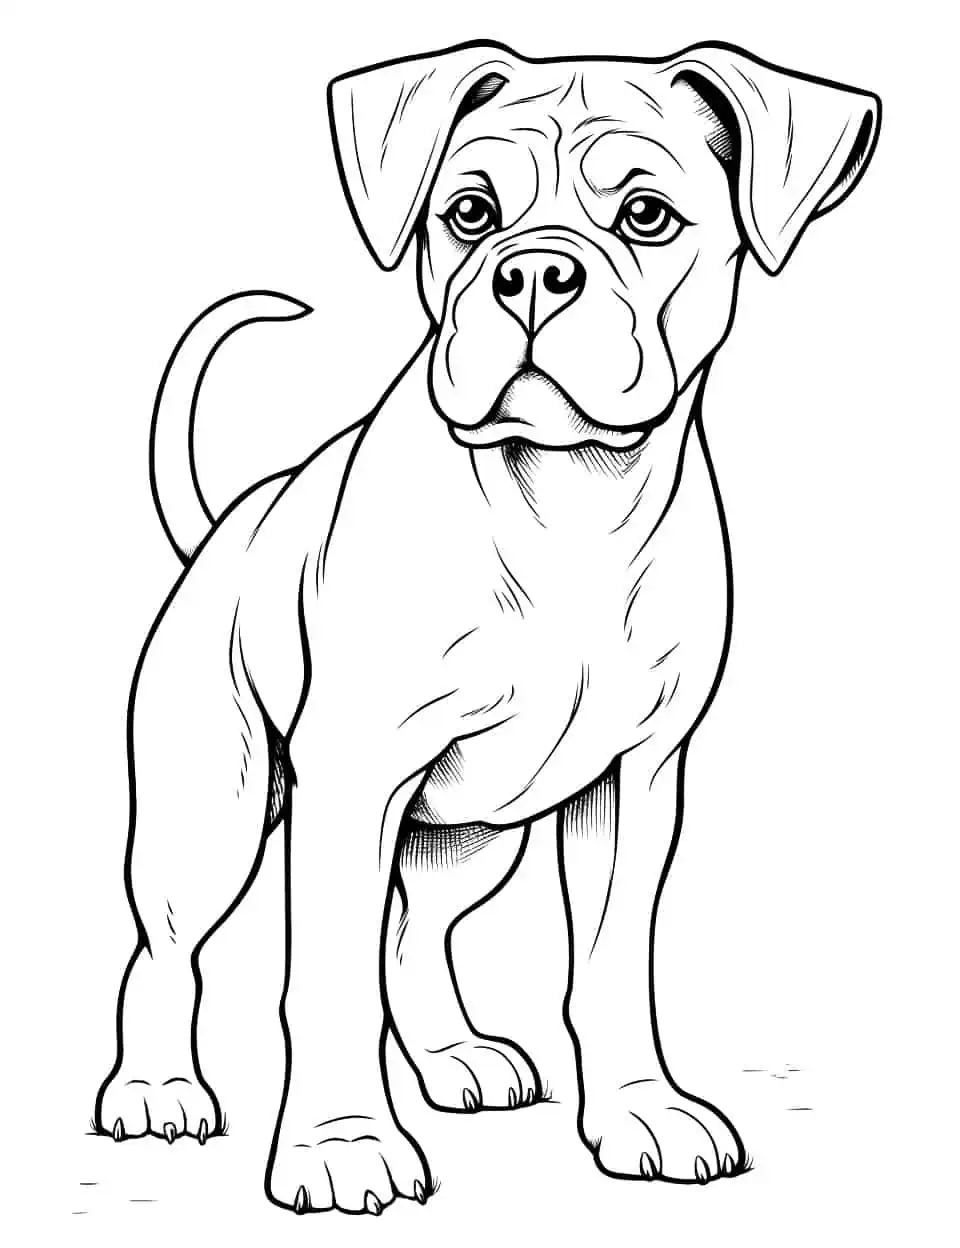 Full Page Boxer Portrait Dog Coloring - A full-page, realistic portrait of a Boxer ready to be colored.